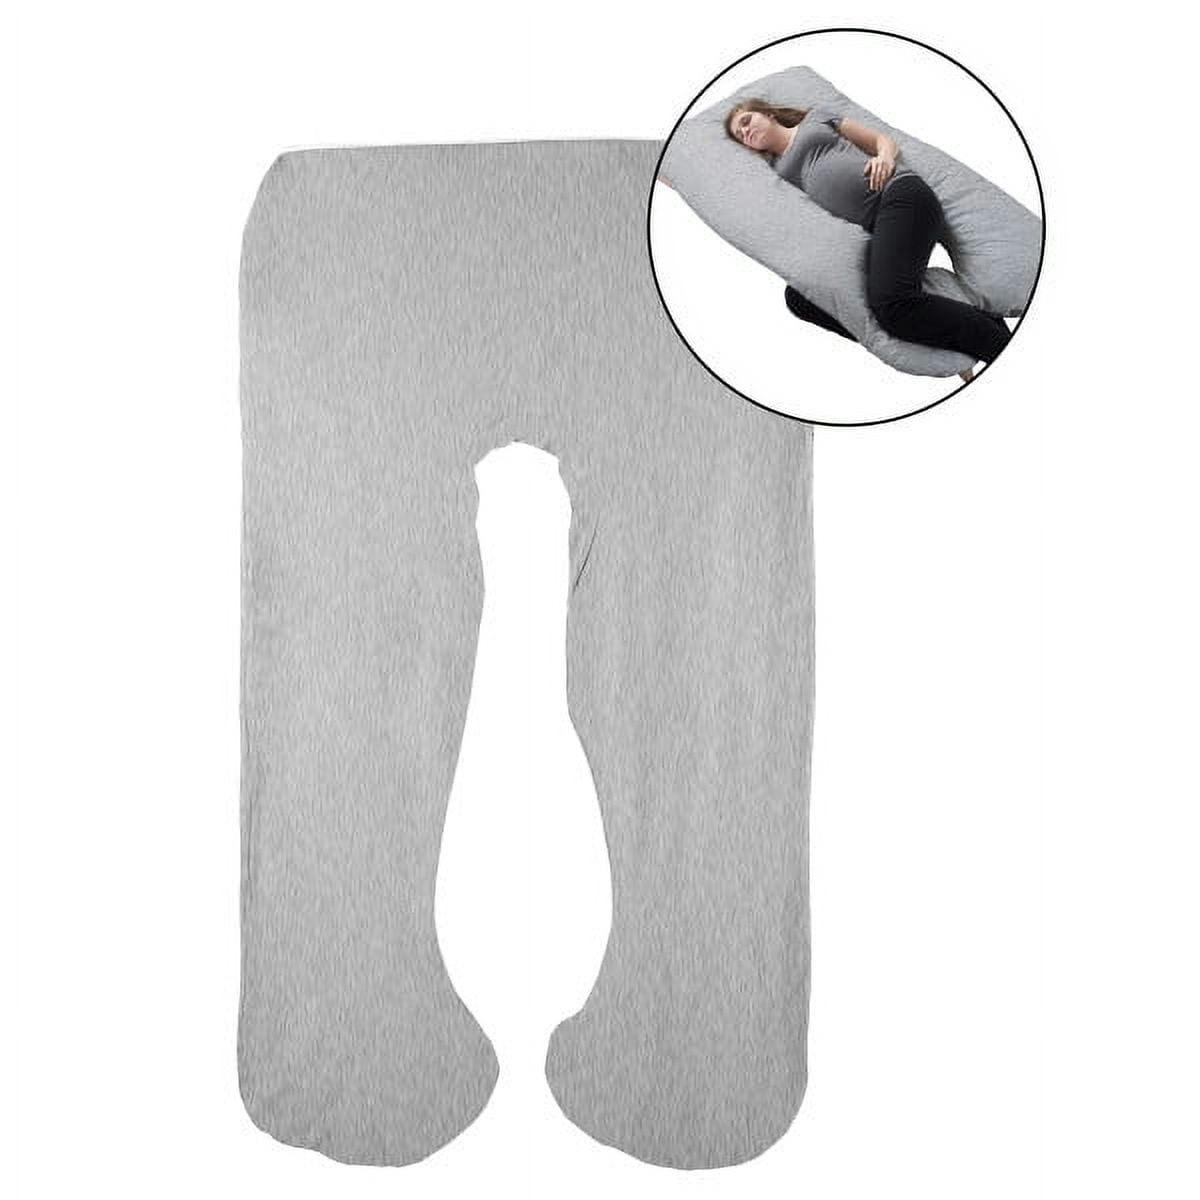 Soft Jersey Knit Cotton U-Shaped Full Body Pillow Cover - Gray